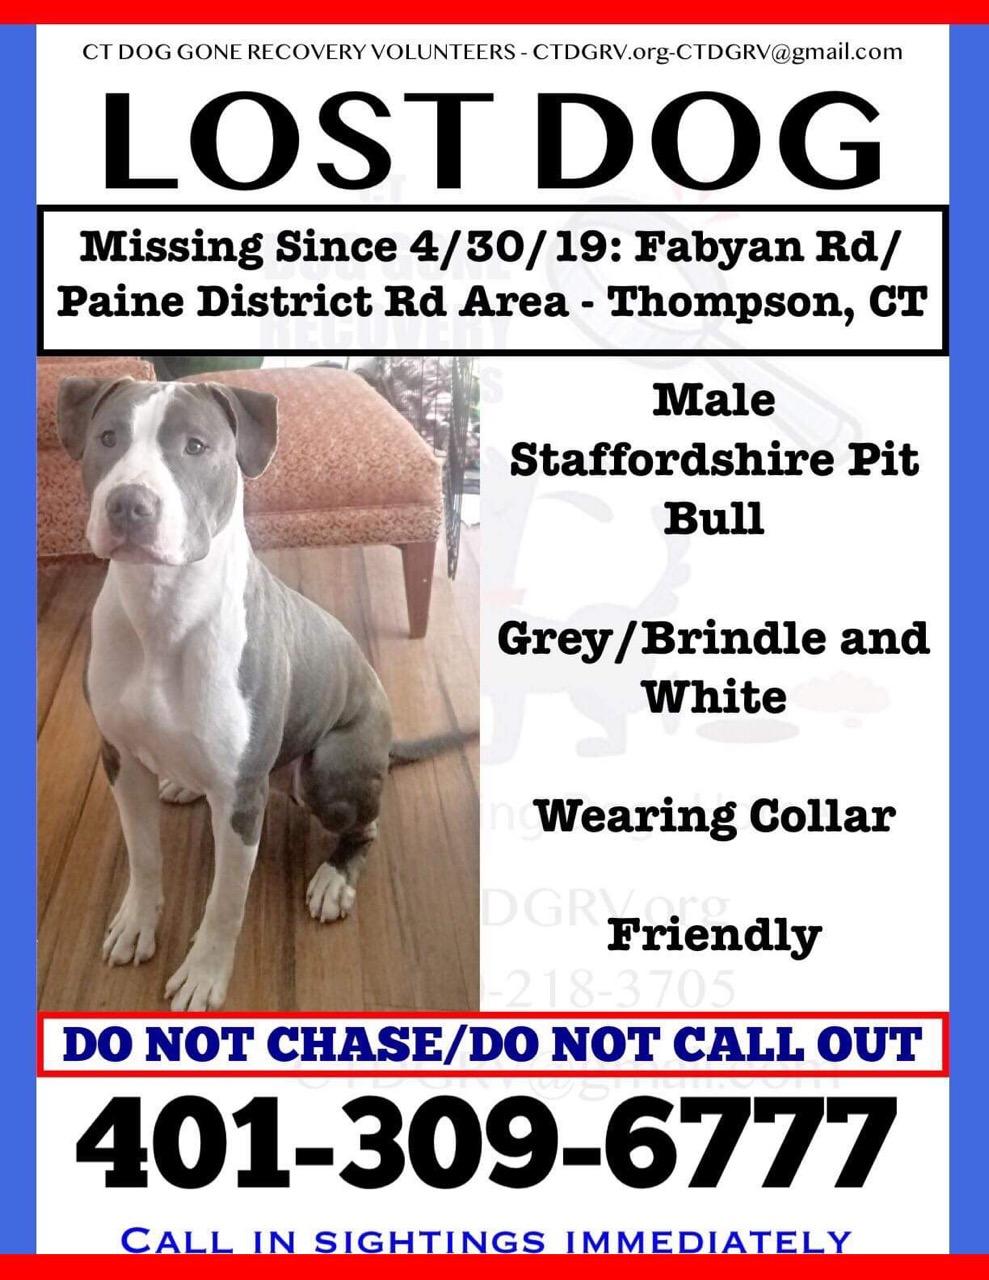 Image of Scout, Lost Dog